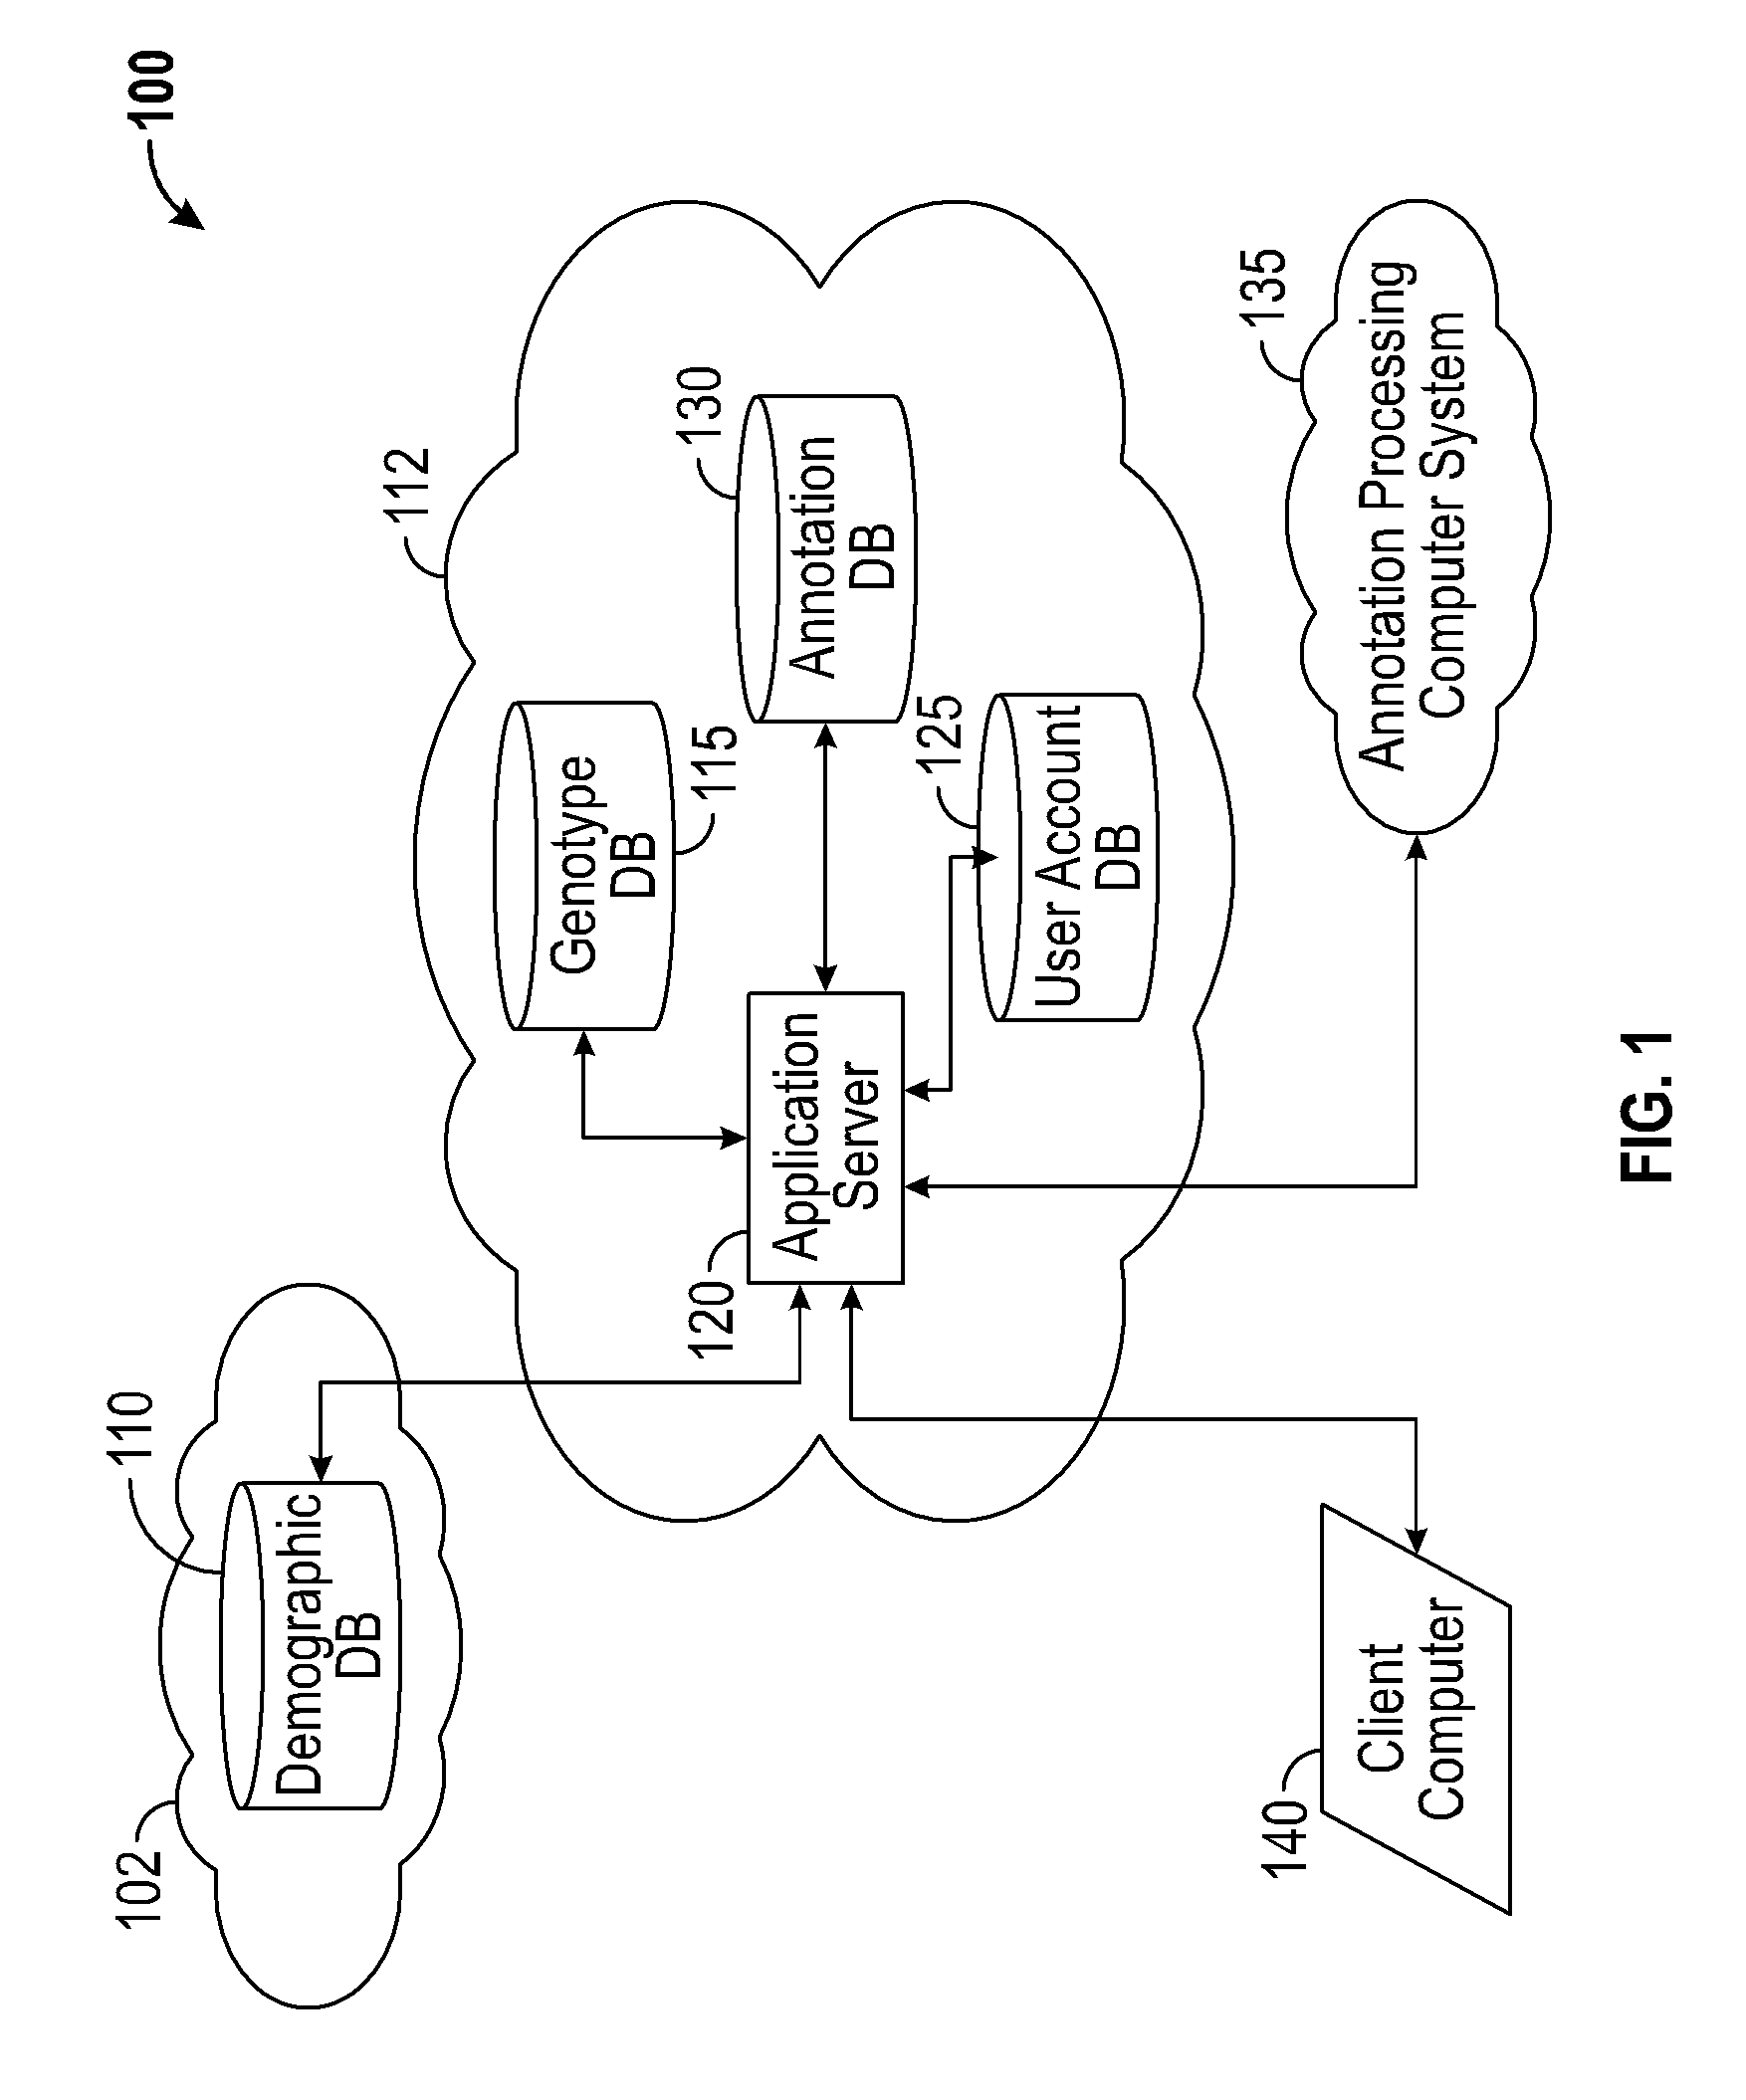 Systems and methods for genomic variant annotation